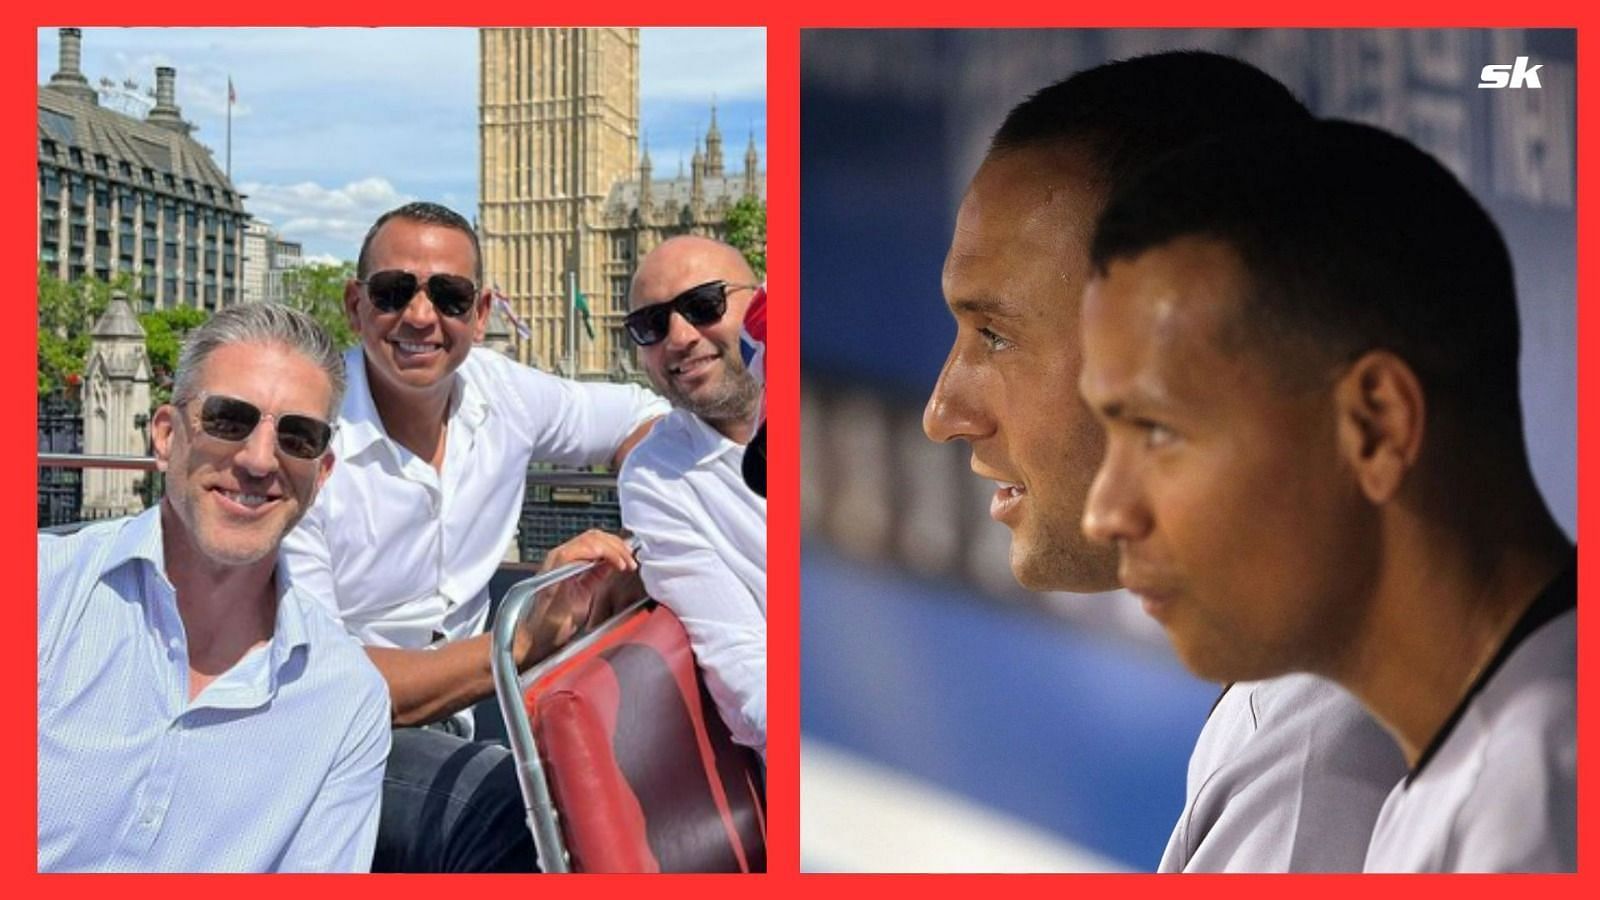 Alex Rodriguez and Derek Jeter enjoy the streets of London ahead of MLB